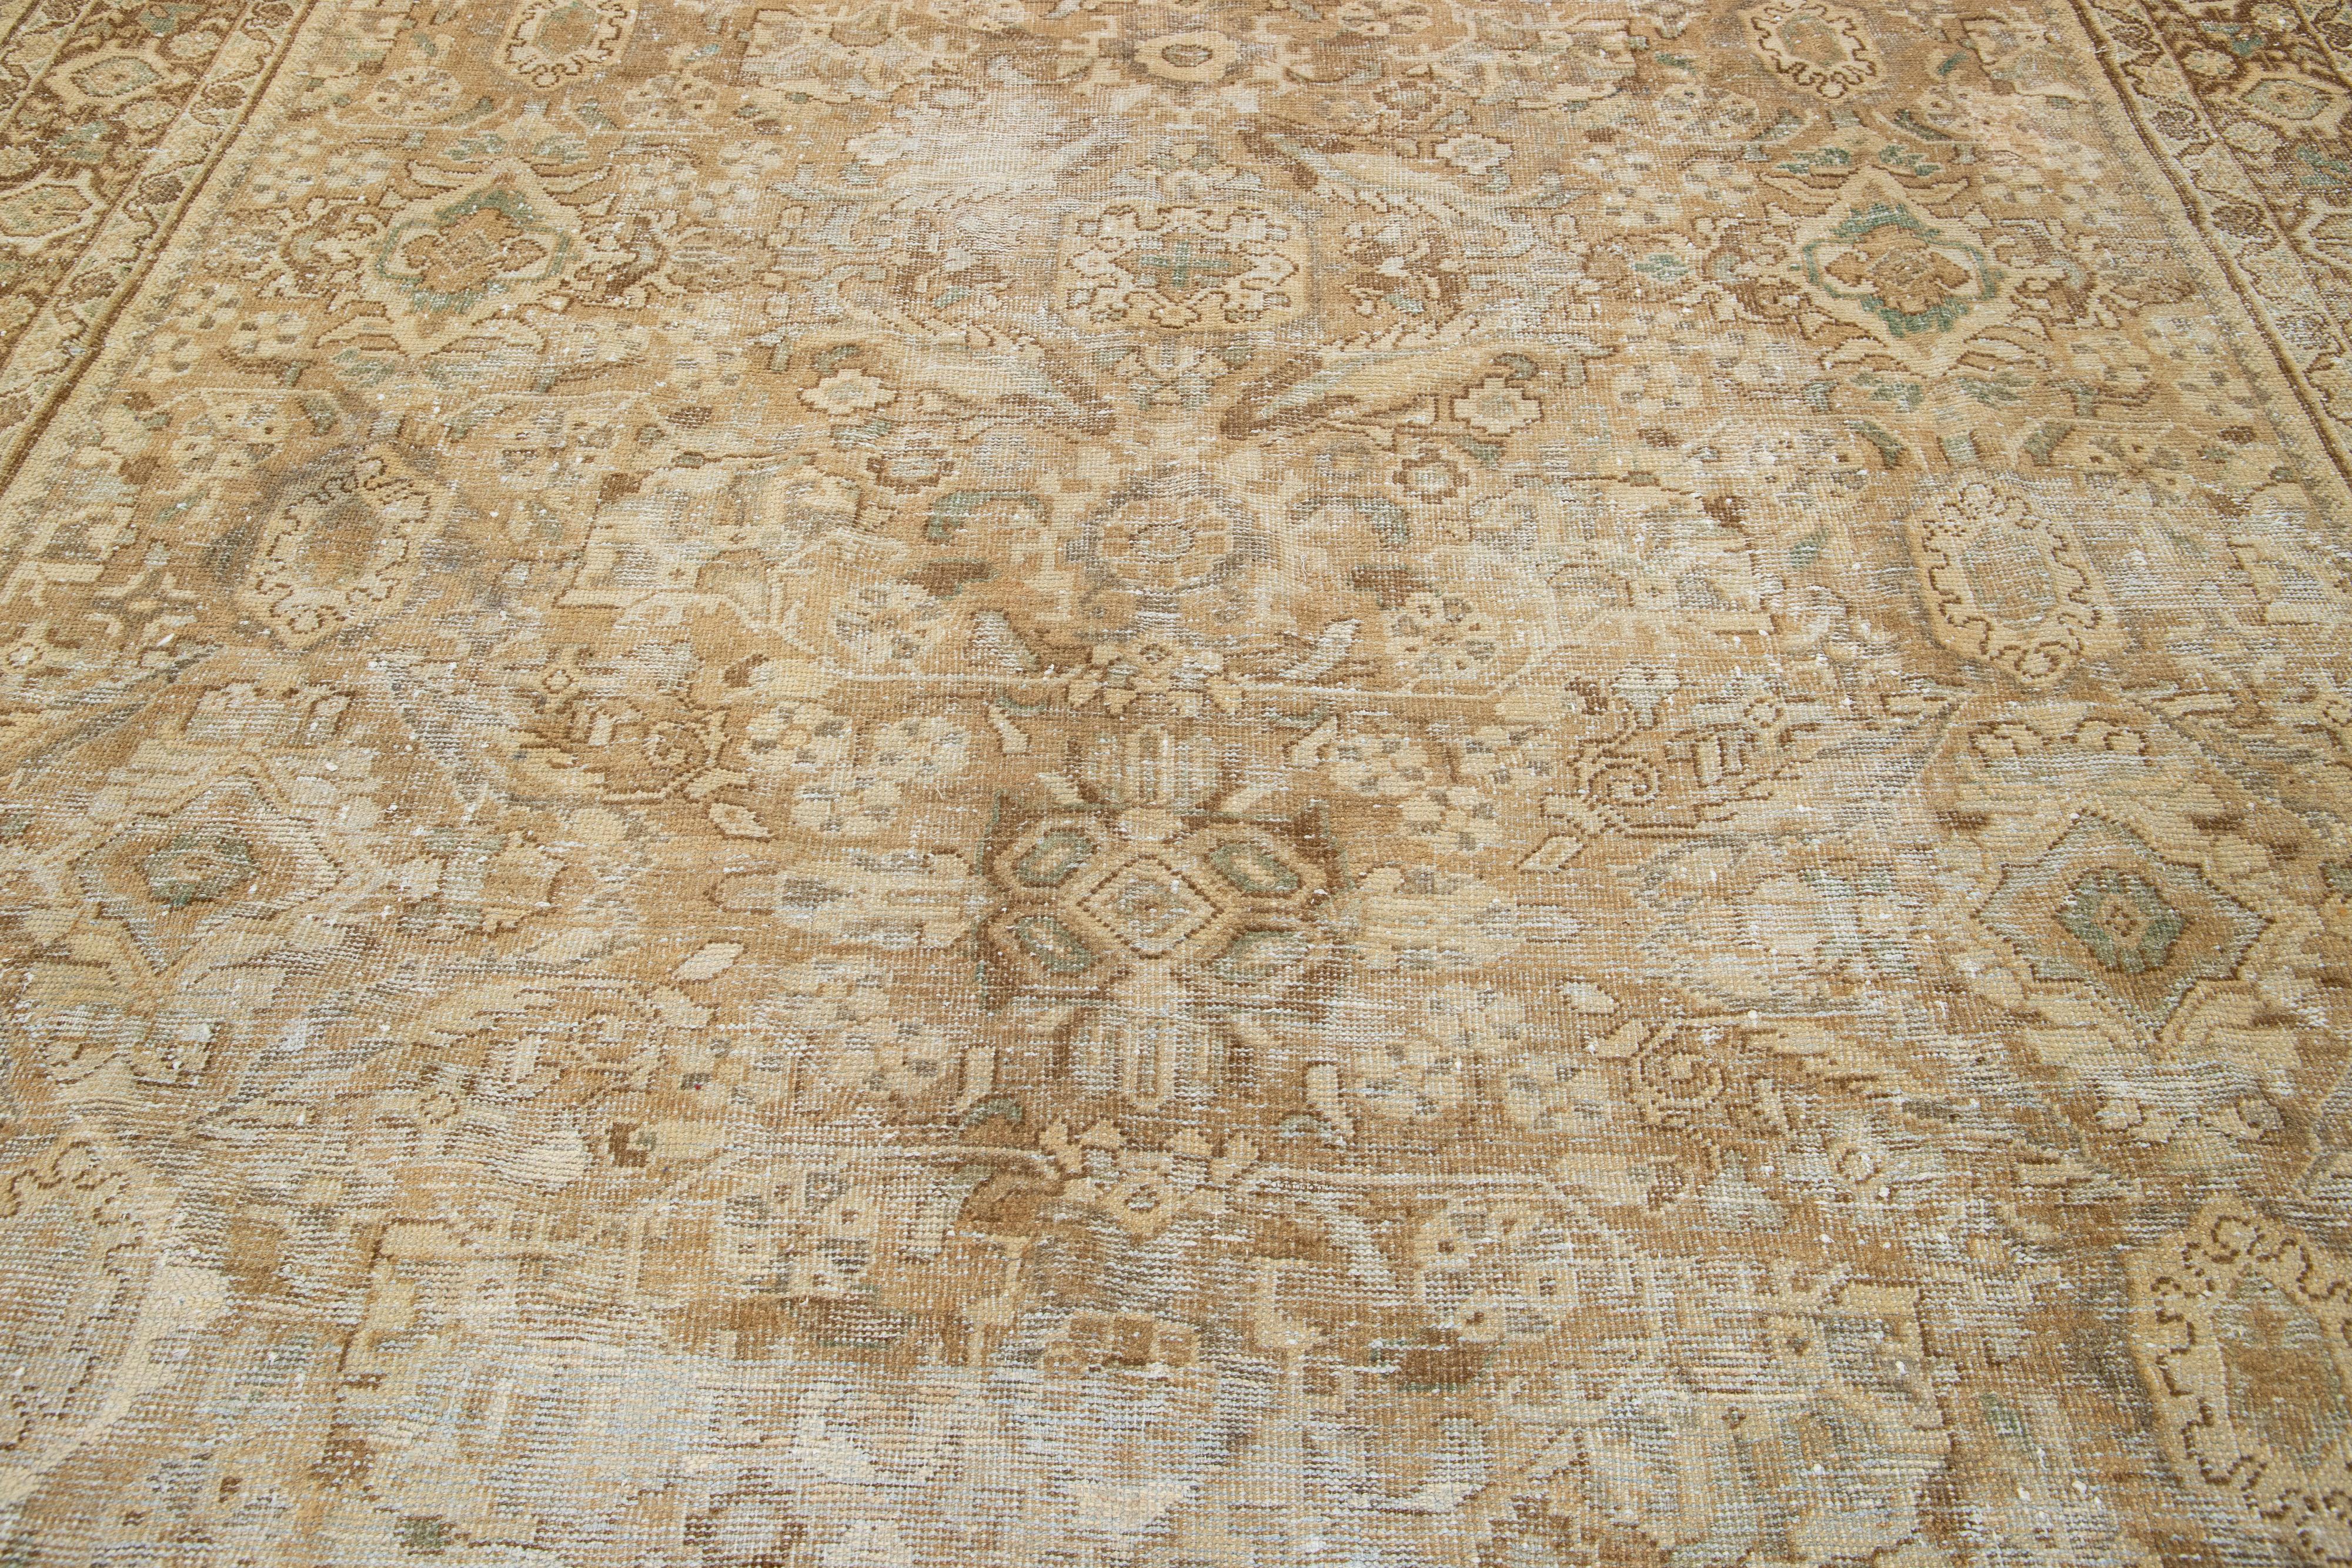 Islamic Persian Floral Mahal Wool Rug Vintage Handmade With Beige Field For Sale